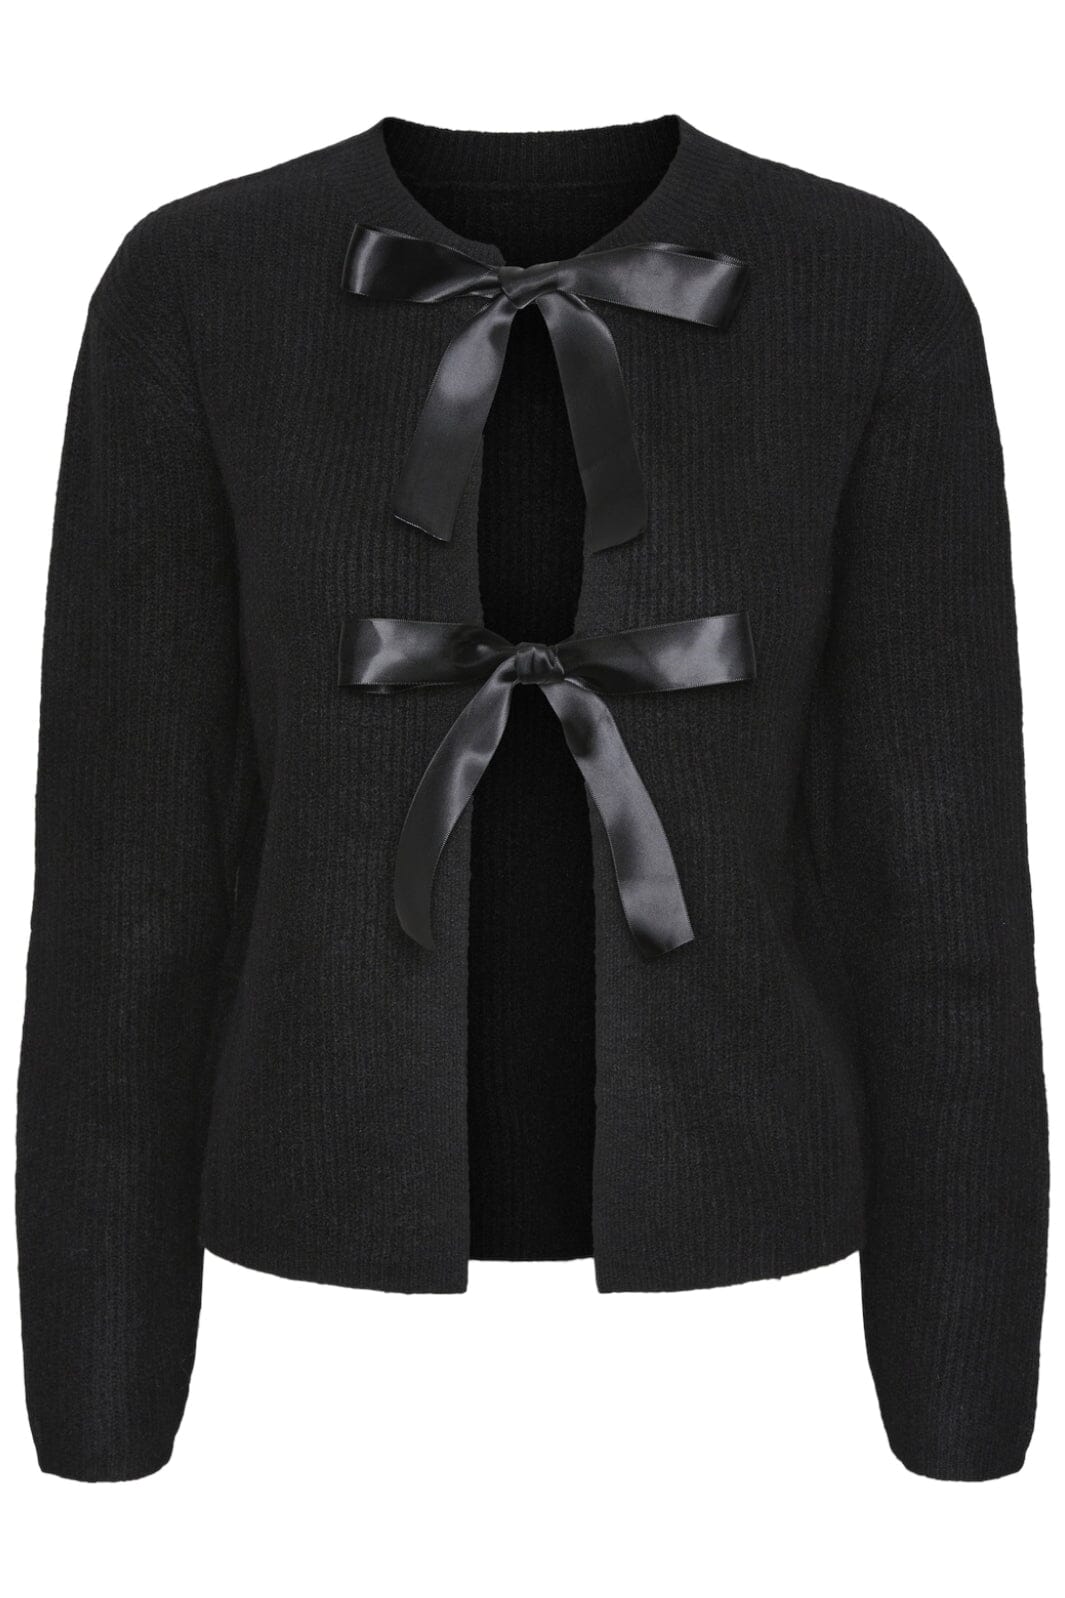 Pieces - Pcrilly Ls Reversible Bow Knit - 4674405 Black Dtm Woven Bow Cardigans 